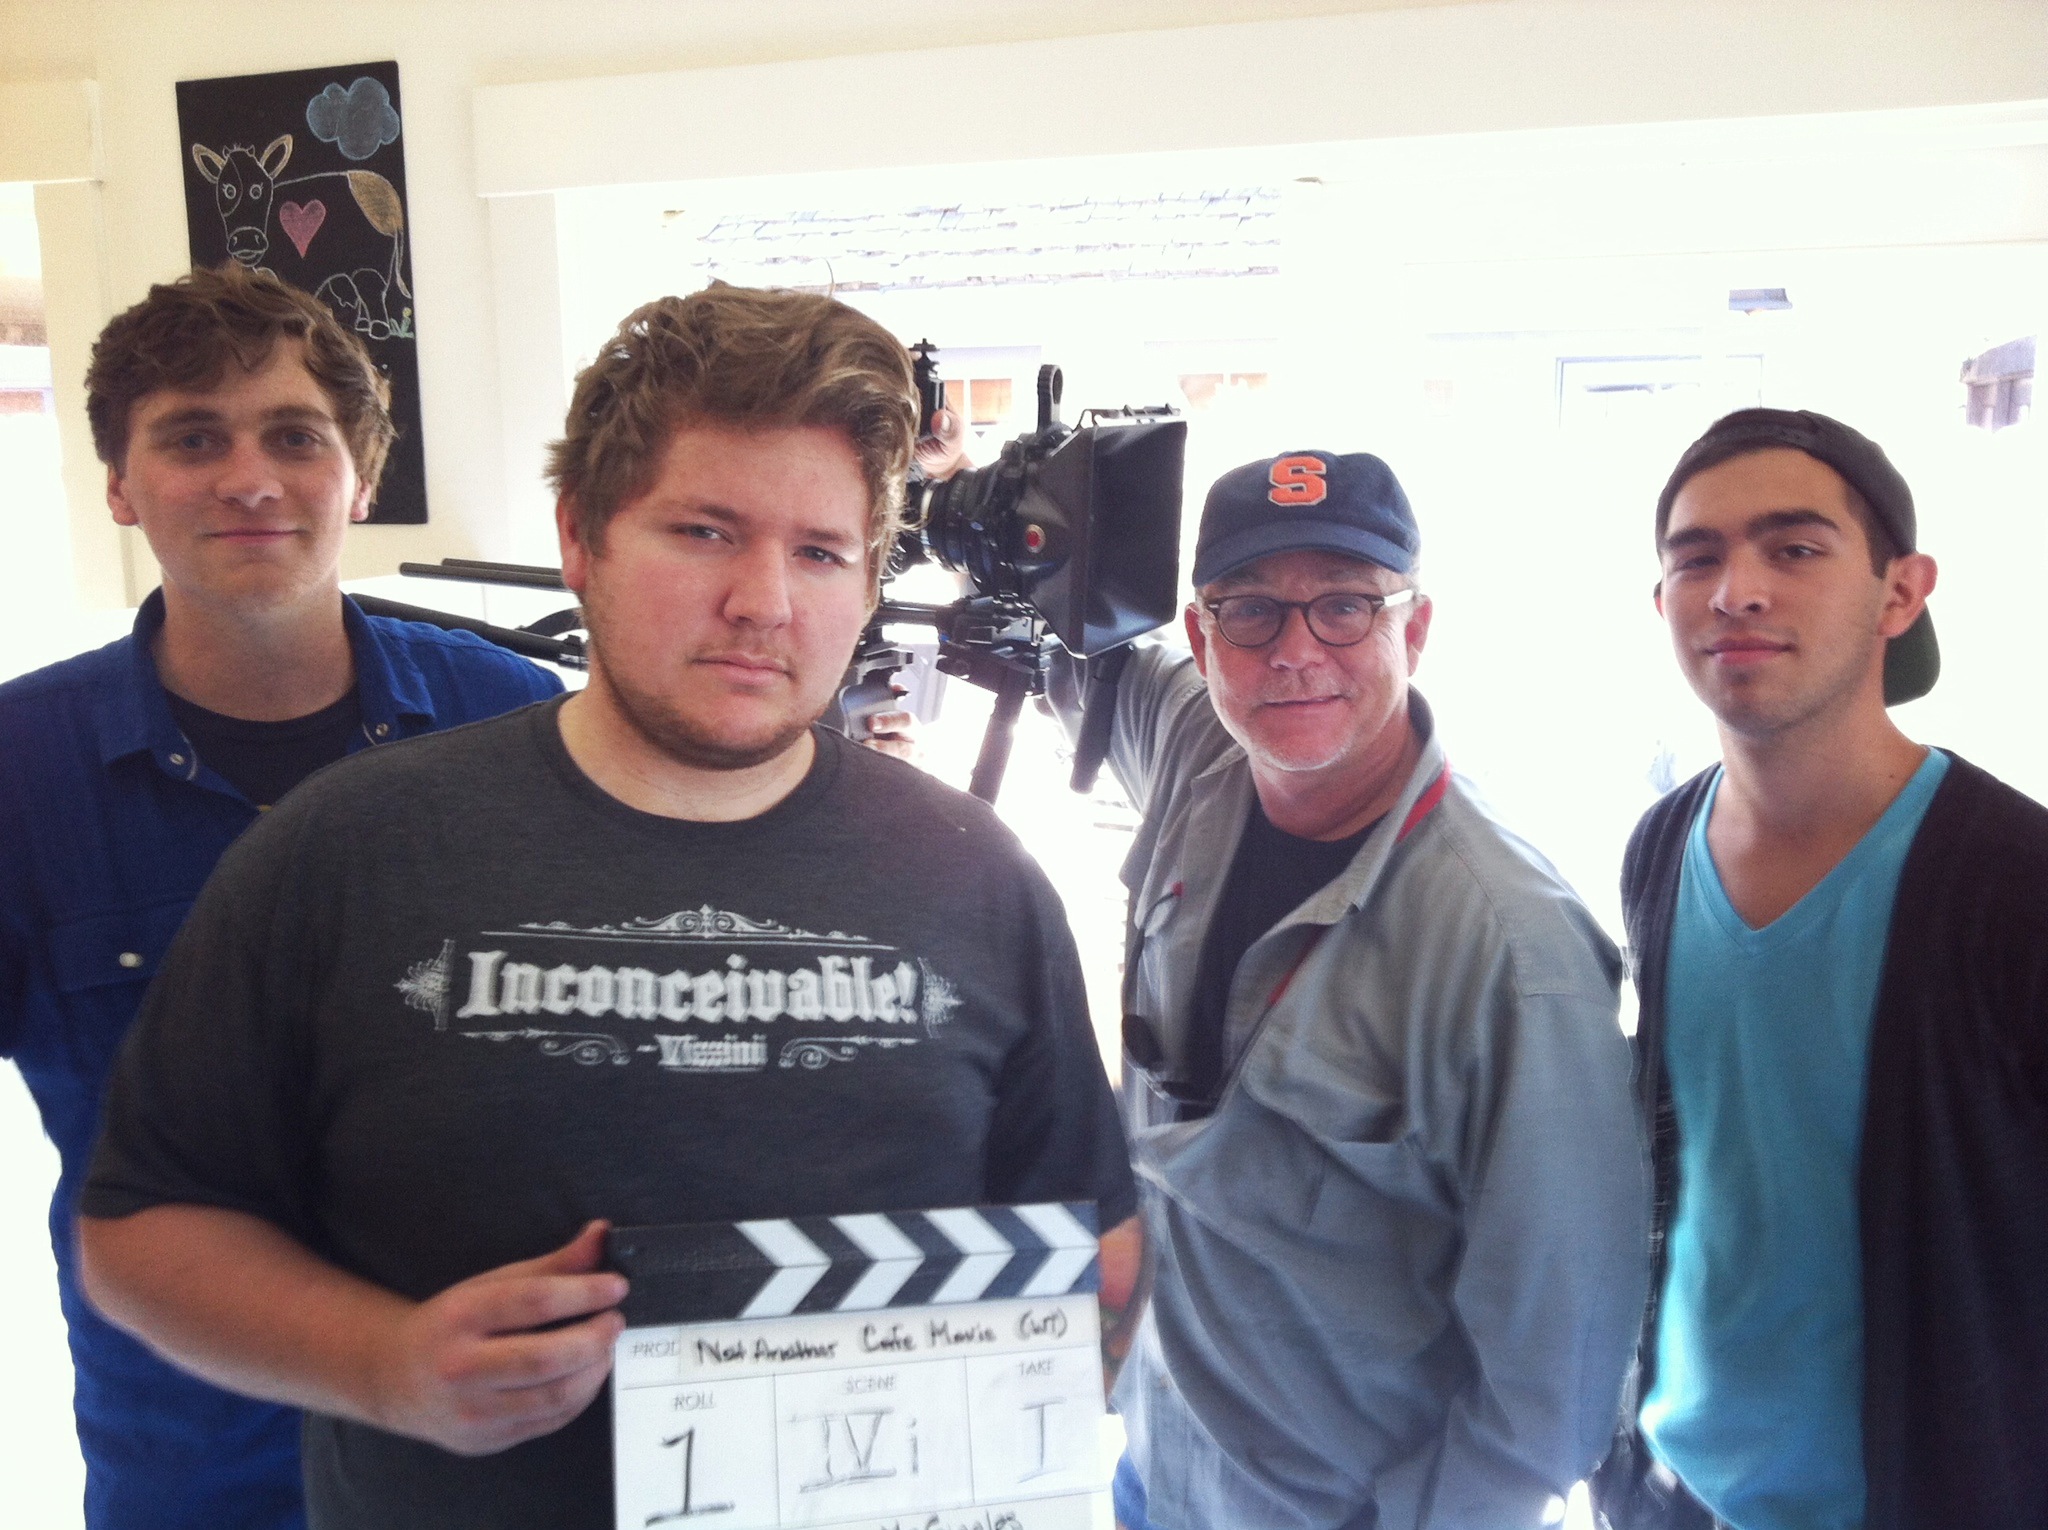 [Left to Right] Jonathon McGee (Writer, Director), Paul Kiszonas (Assistant Director), Taggart Lee (Director of Photography), and Javier Bueno (Camera Operator, Director of Photography) at Petite Reve Cafe during the filming of 